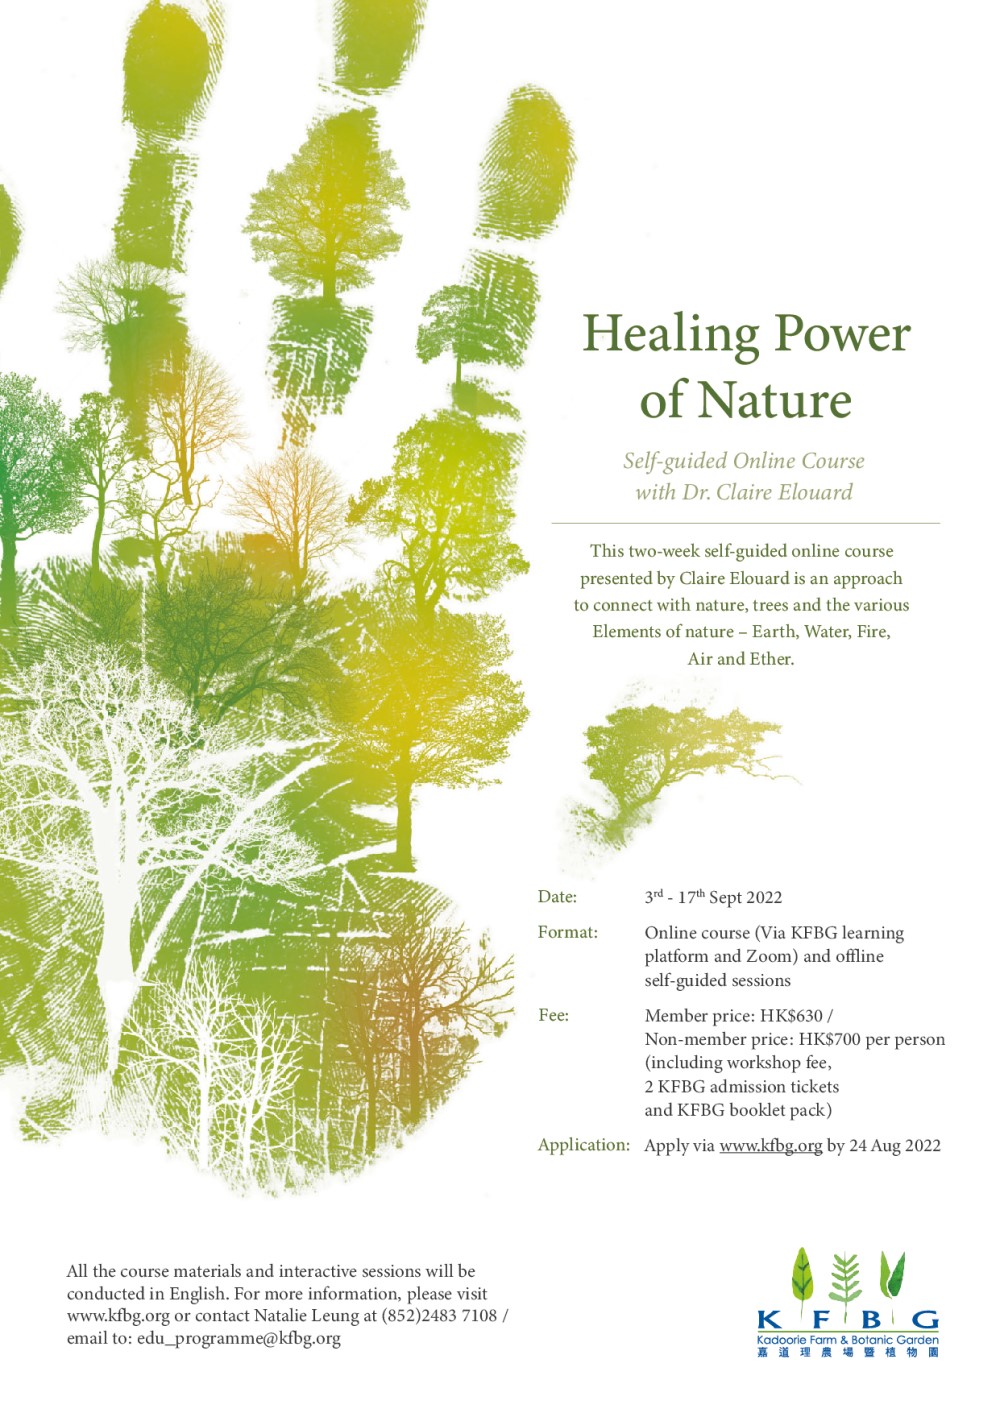 Healing Power of Nature – Self-guided Online Course with Dr. Claire Elouard